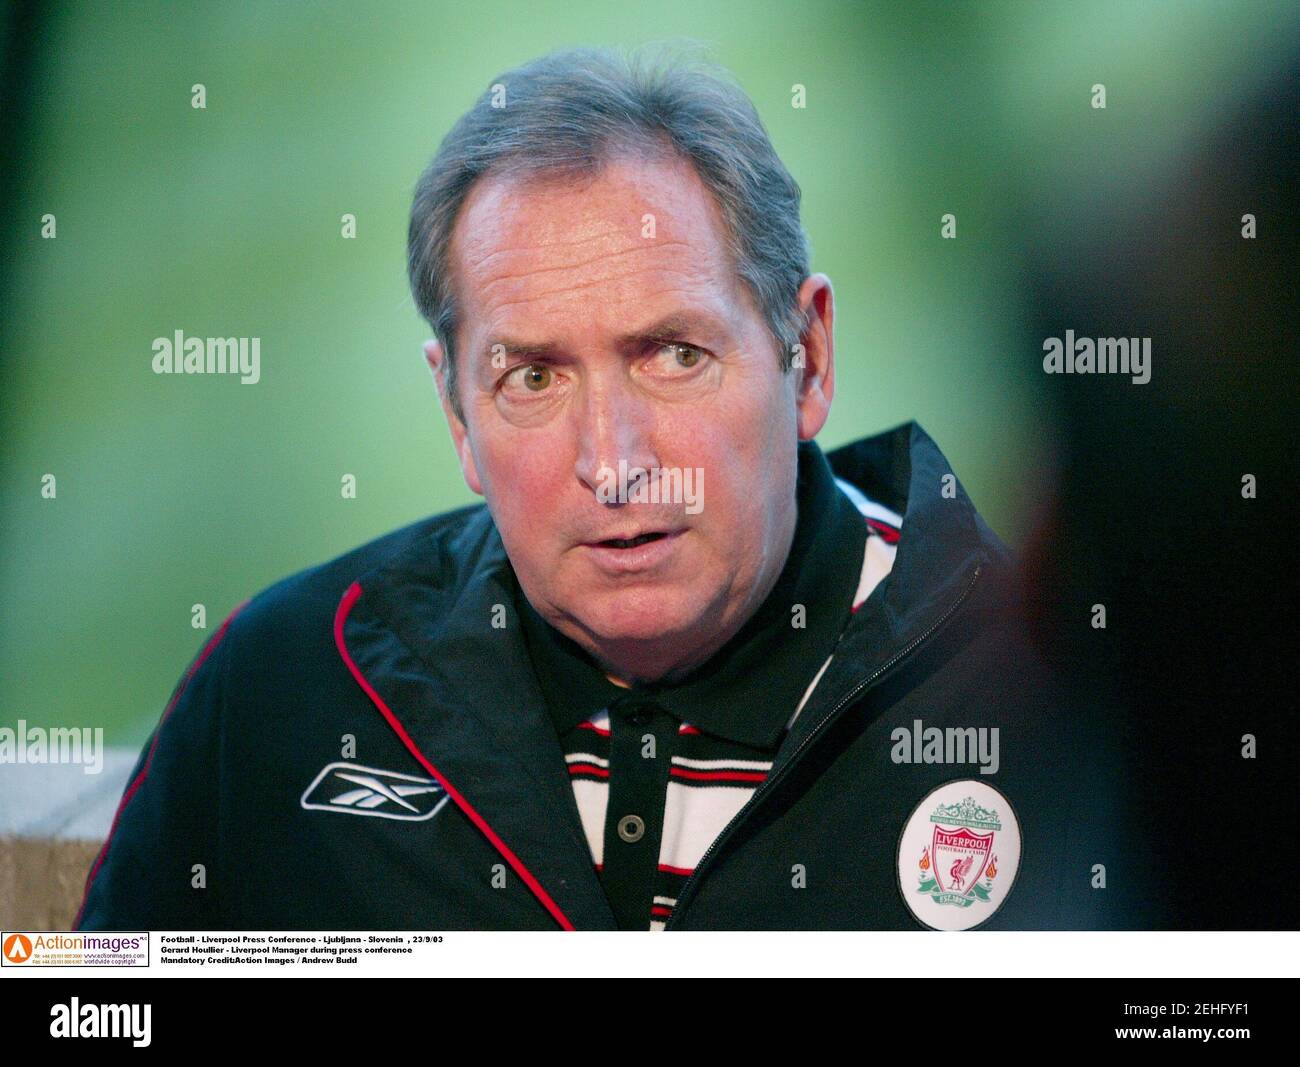 Football - Liverpool Press Conference - Ljubljana - Slovenia  , 23/9/03  Gerard Houllier - Liverpool Manager during press conference  Mandatory Credit:Action Images / Andrew Budd Stock Photo